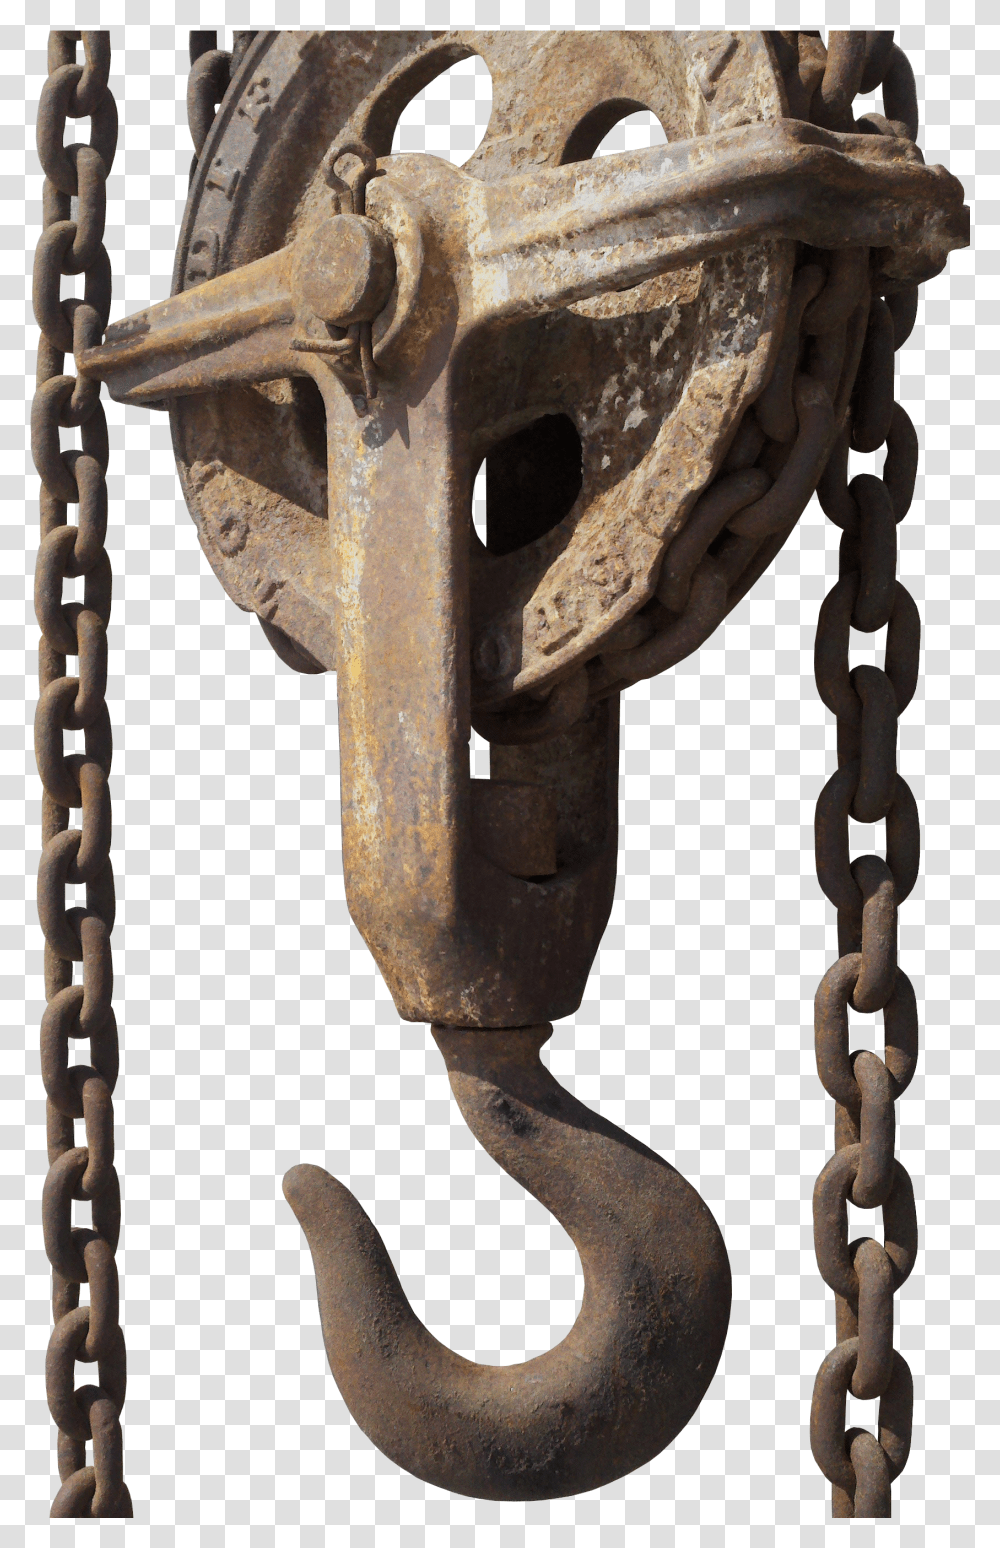 Chain Hoist Chain Hook Rust Iron Chain Technology Rusted Chain Transparent Png